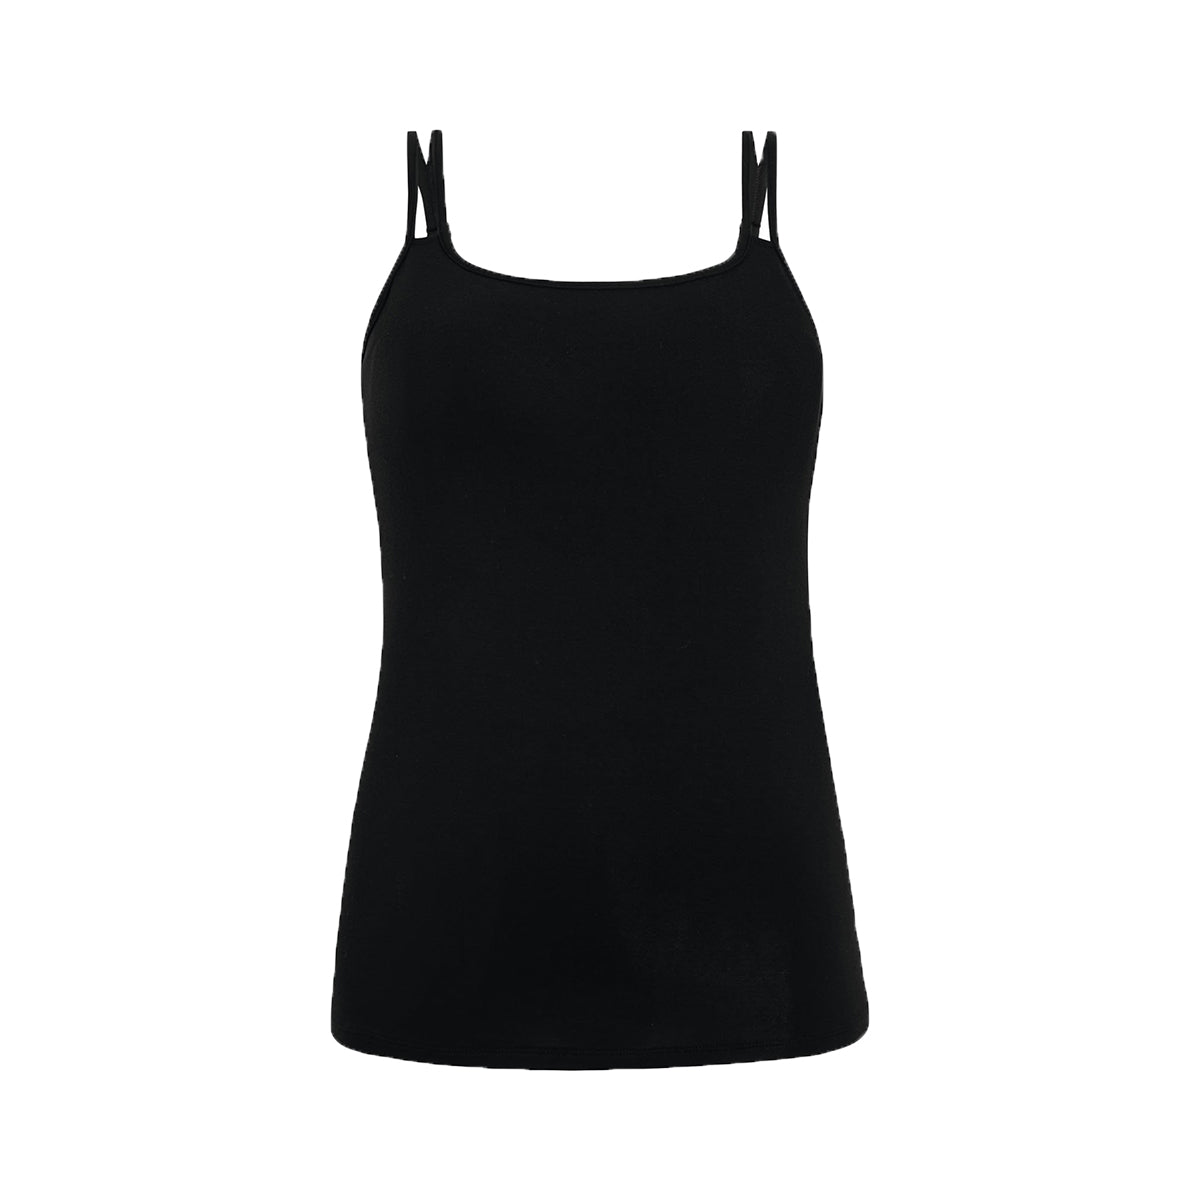 🔥Hot sale🔥 Women Tank Top with Built in Bra Camisole - CamiStore 3